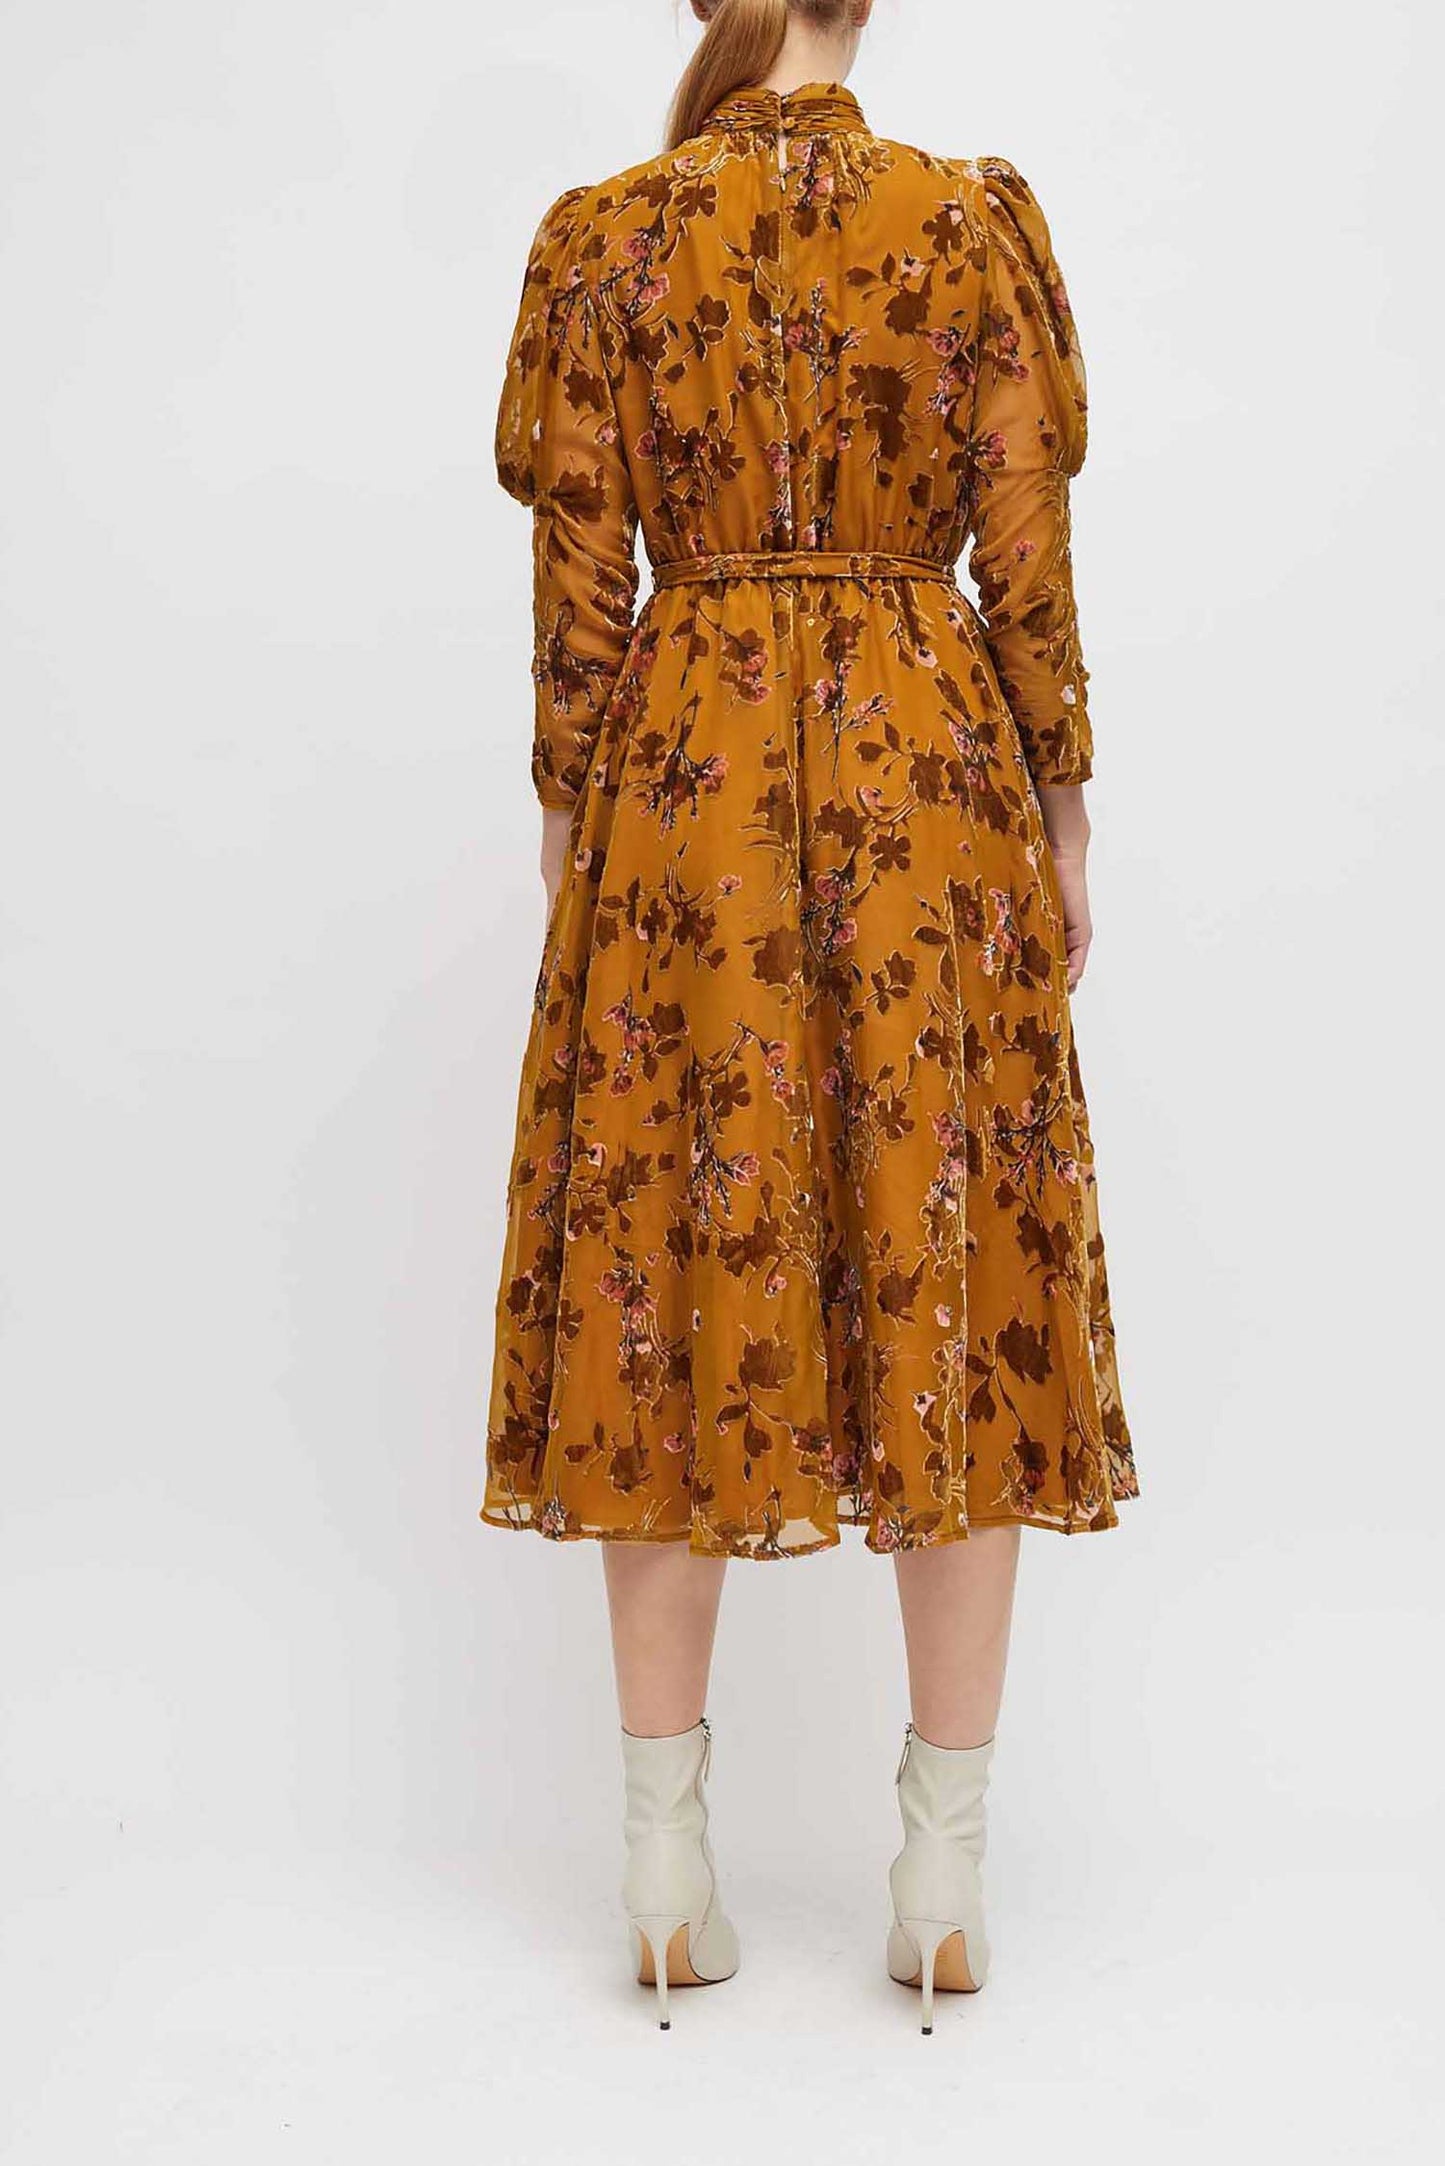 Burn Out Floral Dress - French Connection